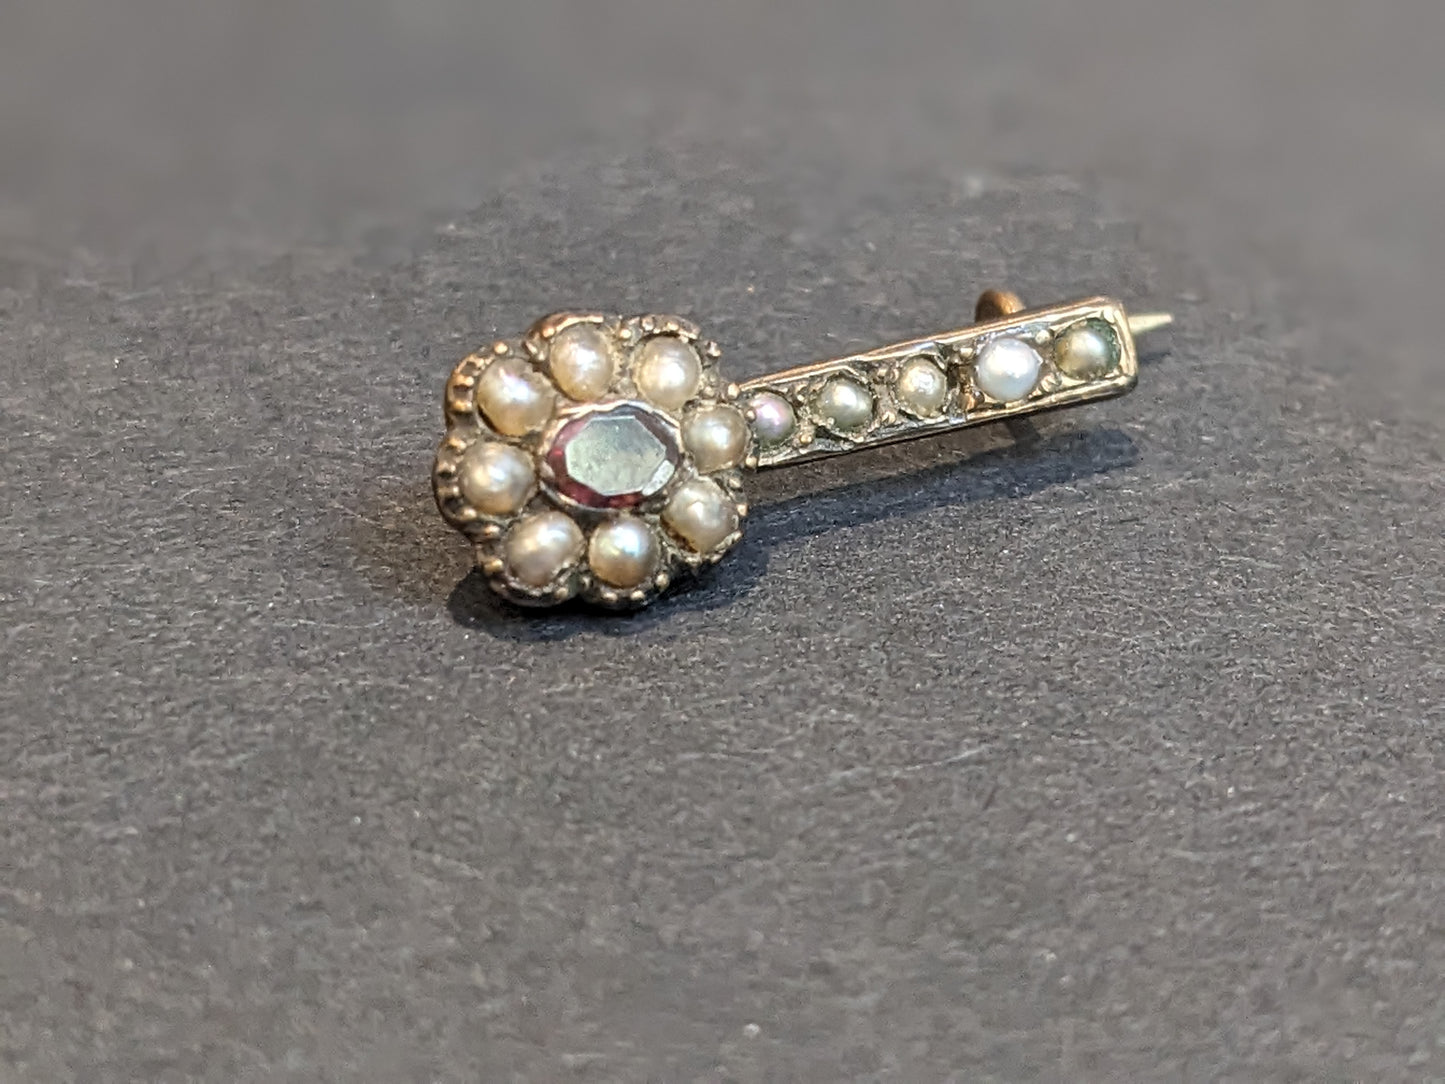 Halley's Comet Pin with Garnet and Seed Pearl